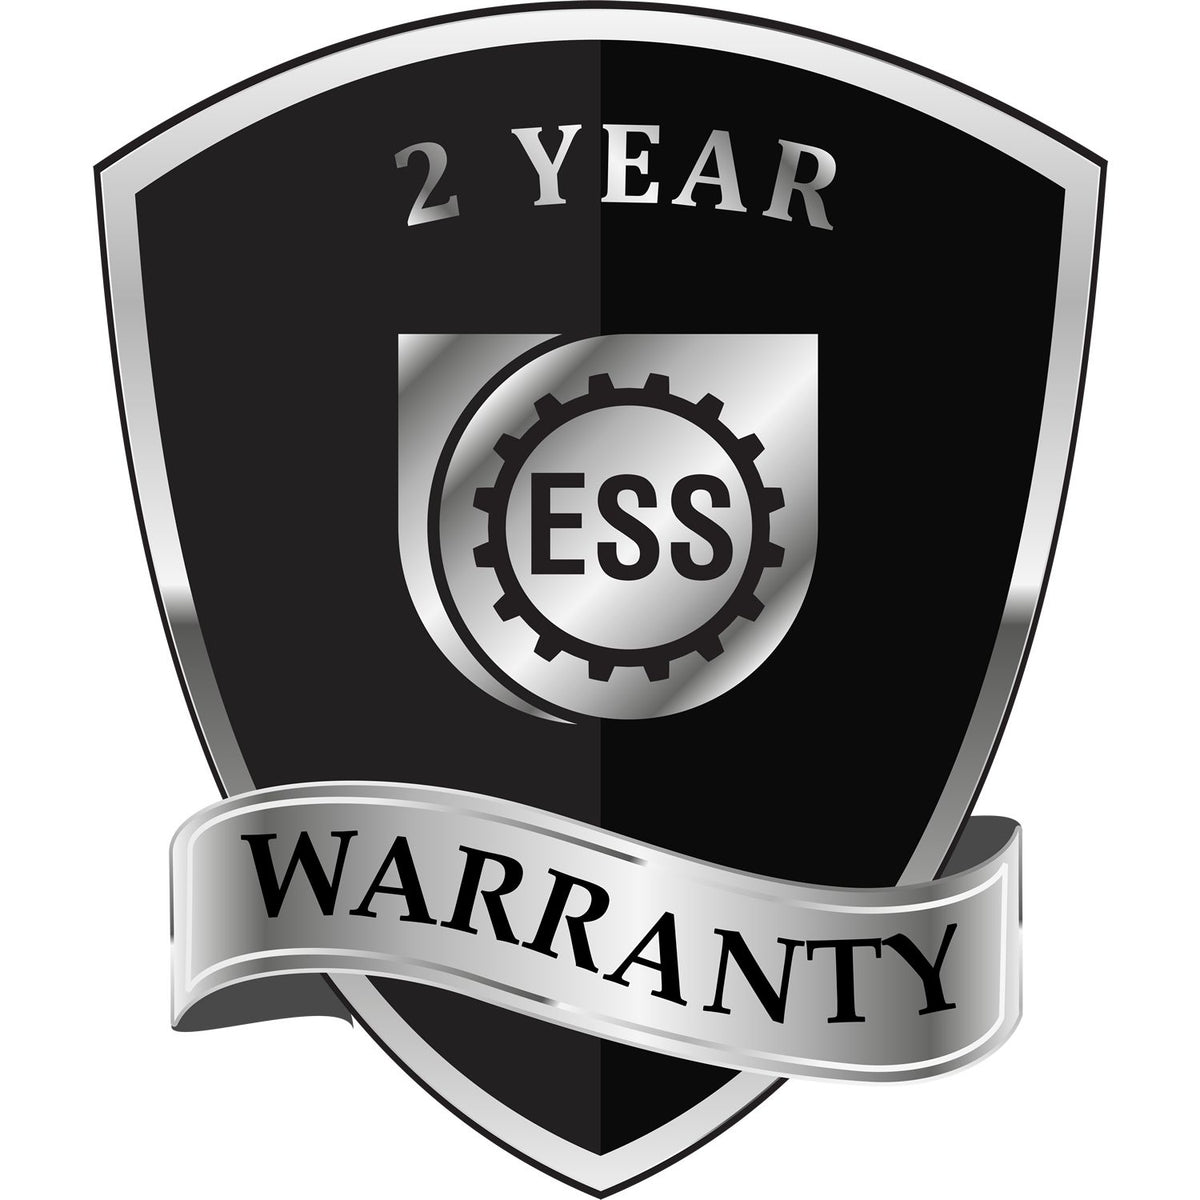 A black and silver badge or emblem showing warranty information for the Heavy Duty Cast Iron Oregon Geologist Seal Embosser